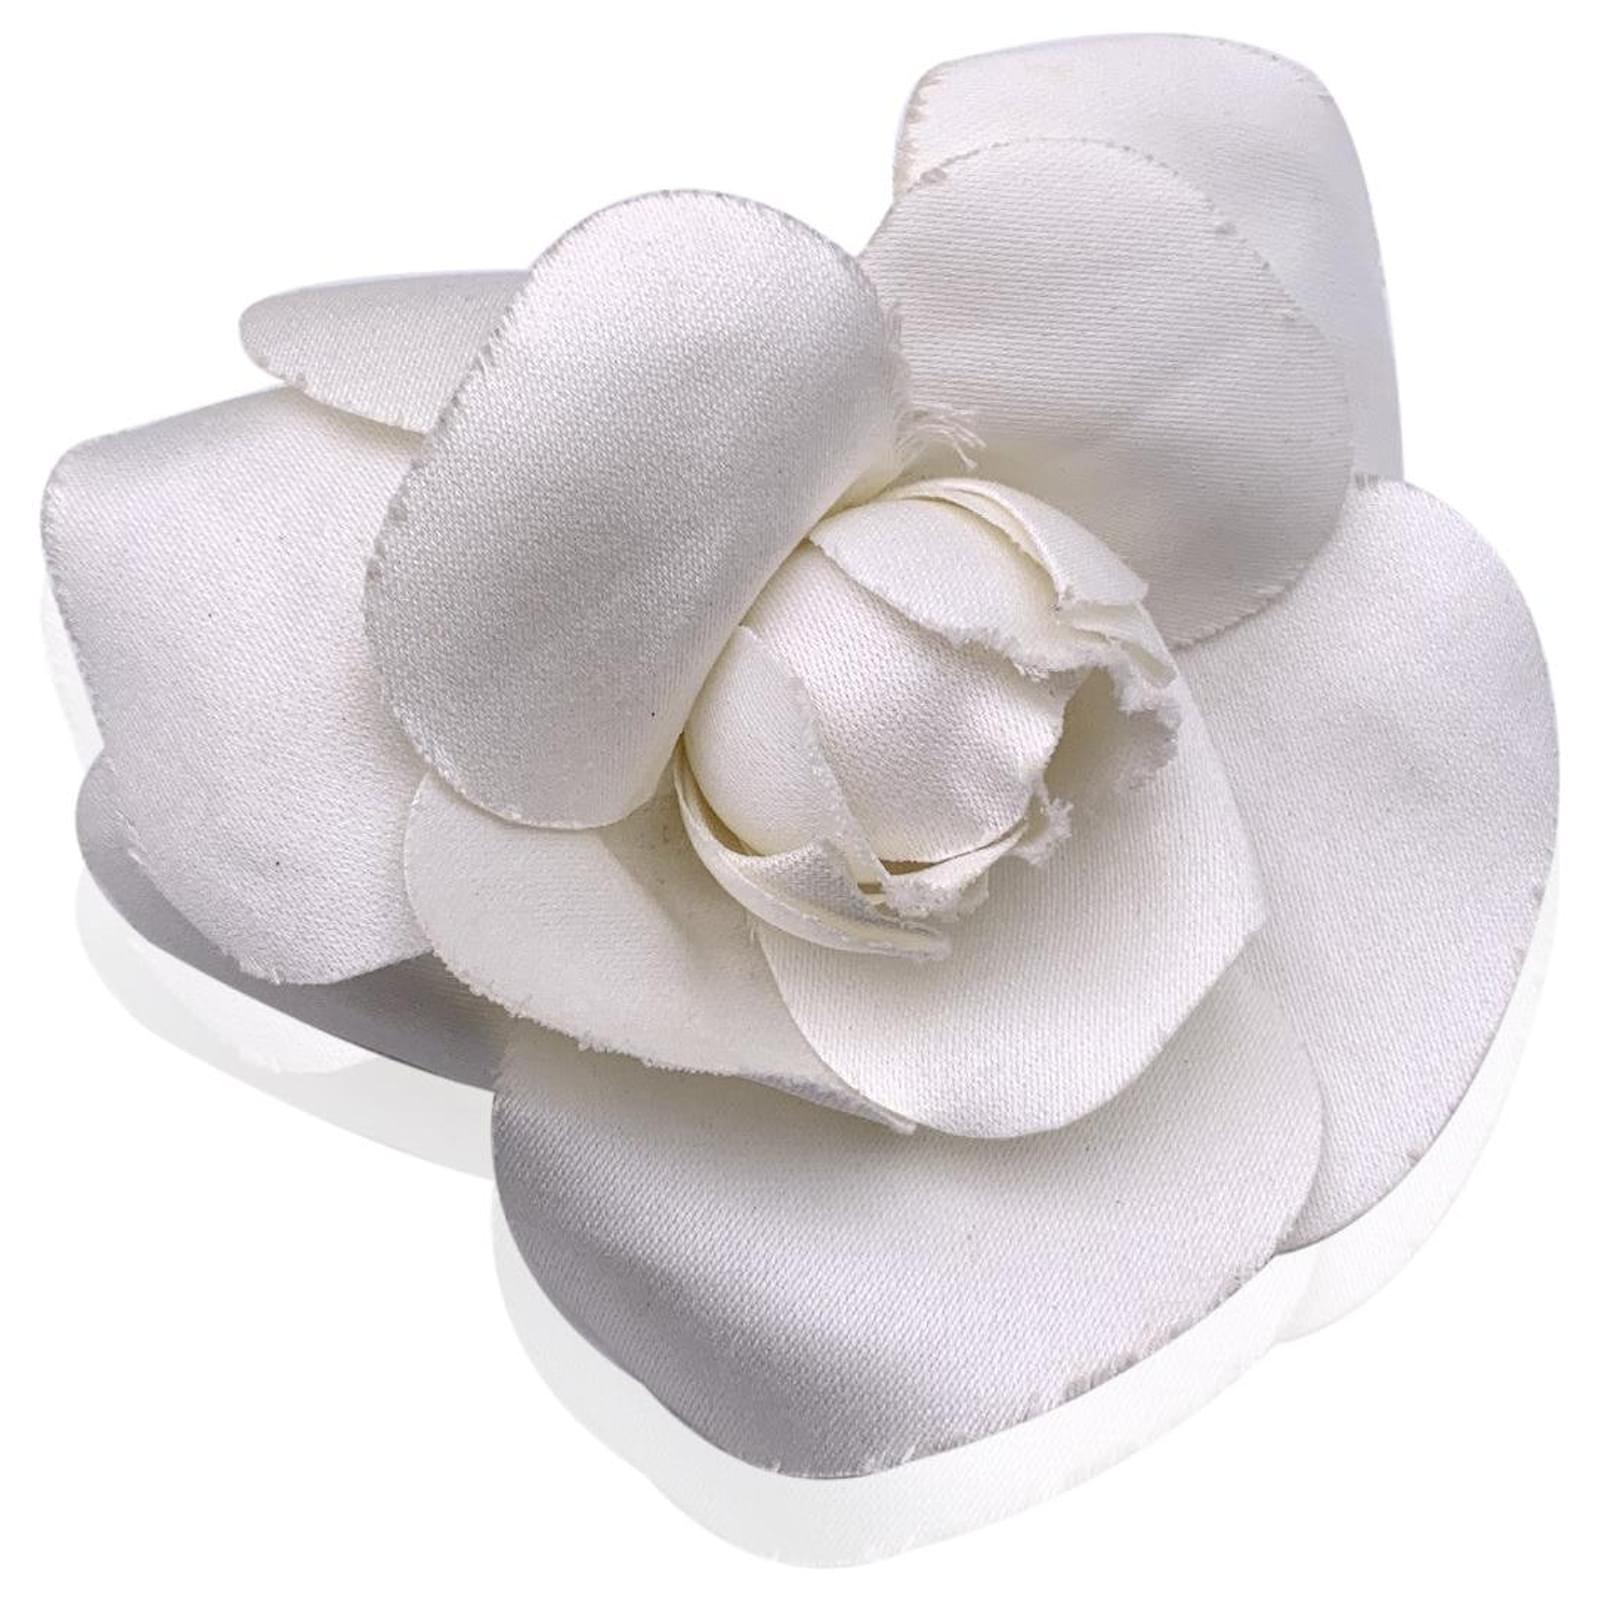 Shop Chanel White Fabric Camellia Flower Brooch Chanel at the official  leagues and brands